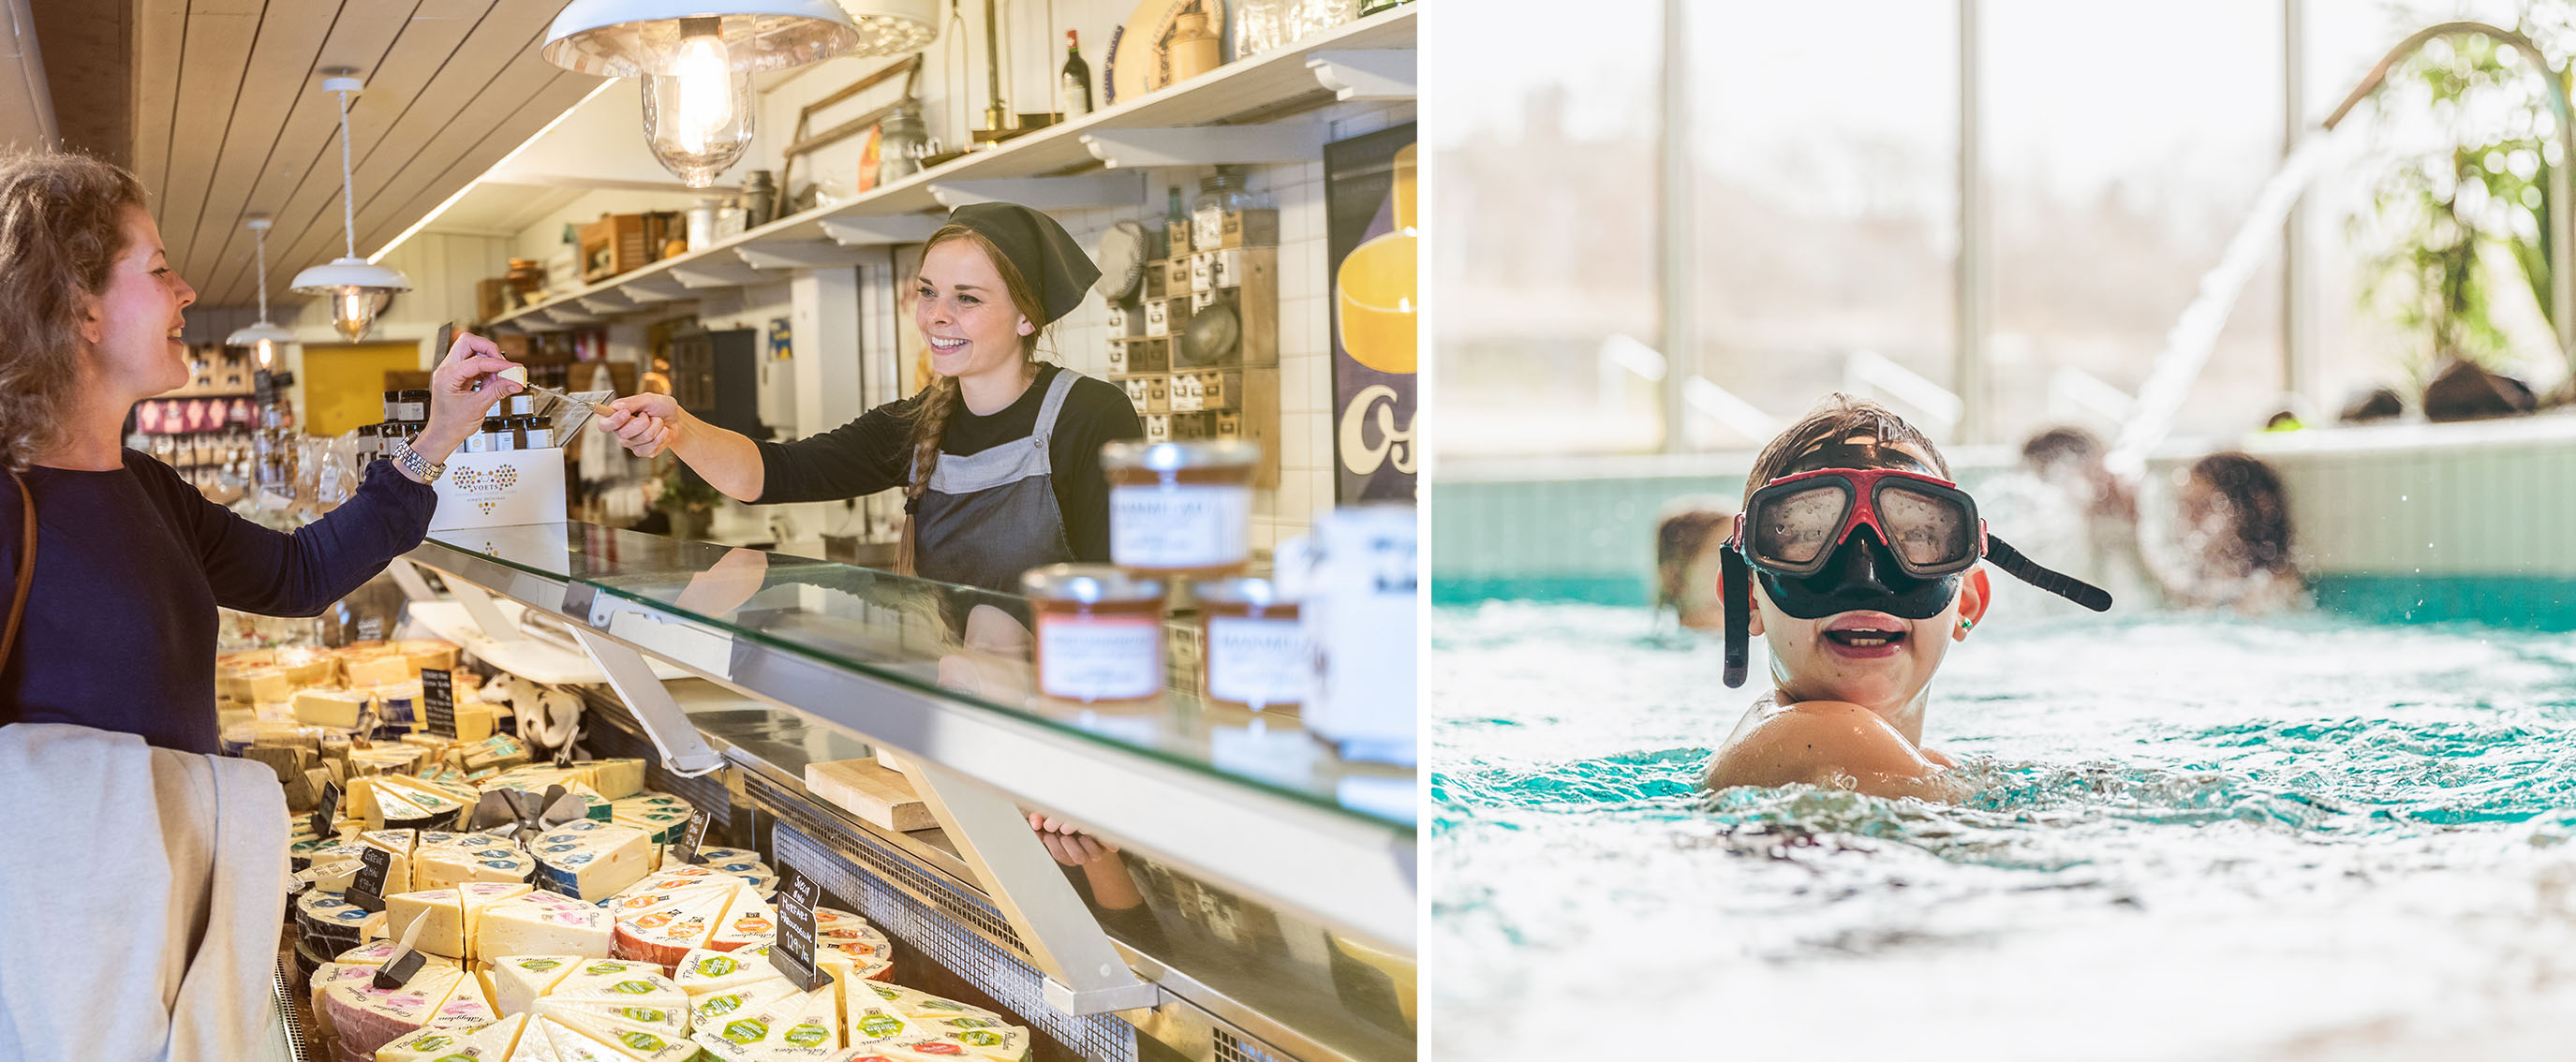 Two pictures. A woman buying cheese from a clerk. The second picture a child wearing swimming goggles and swimming in a pool.